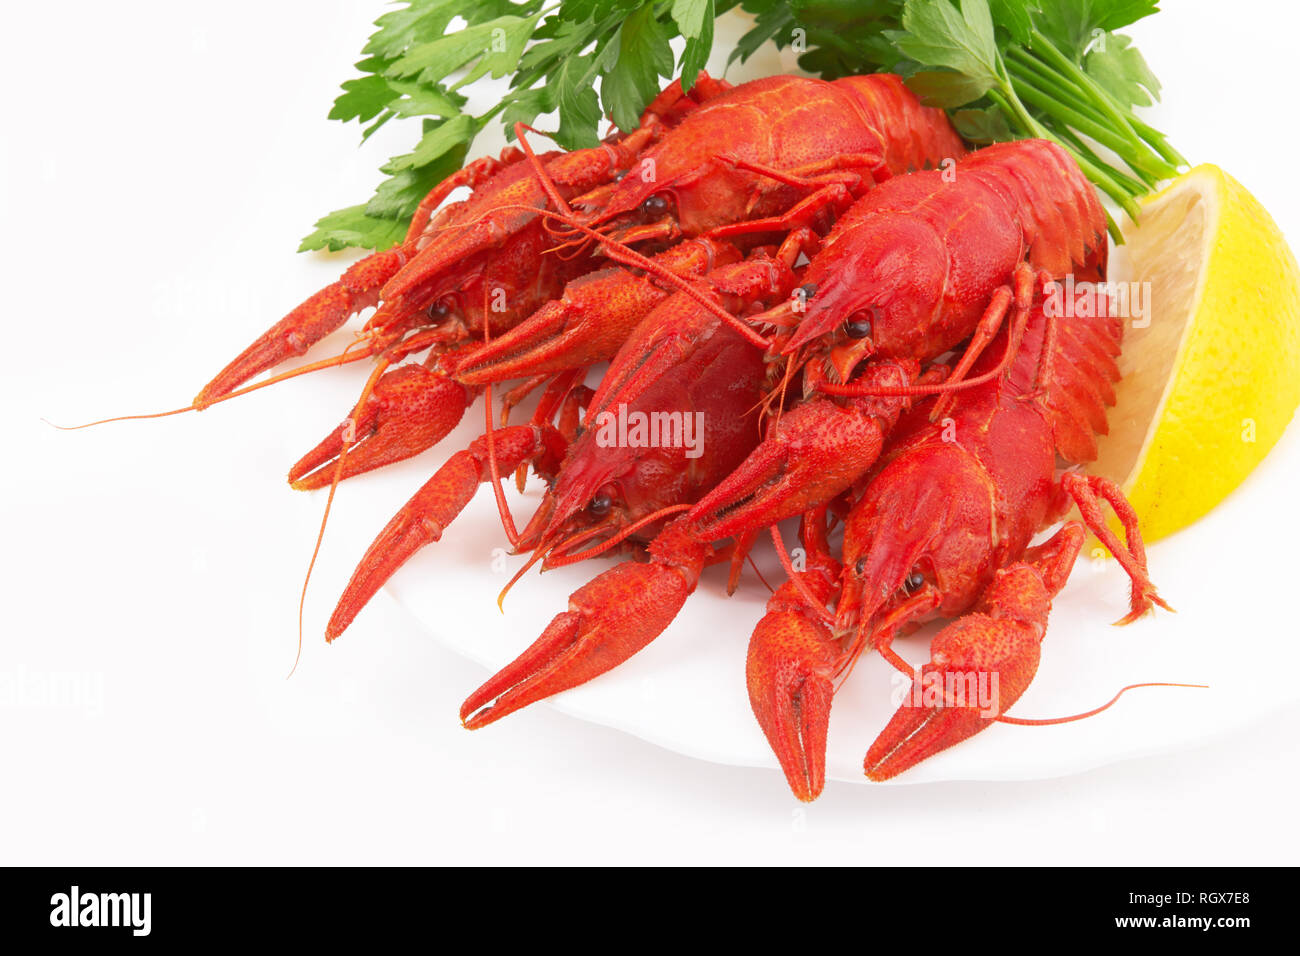 Boiled crayfish in the plate on white background Stock Photo